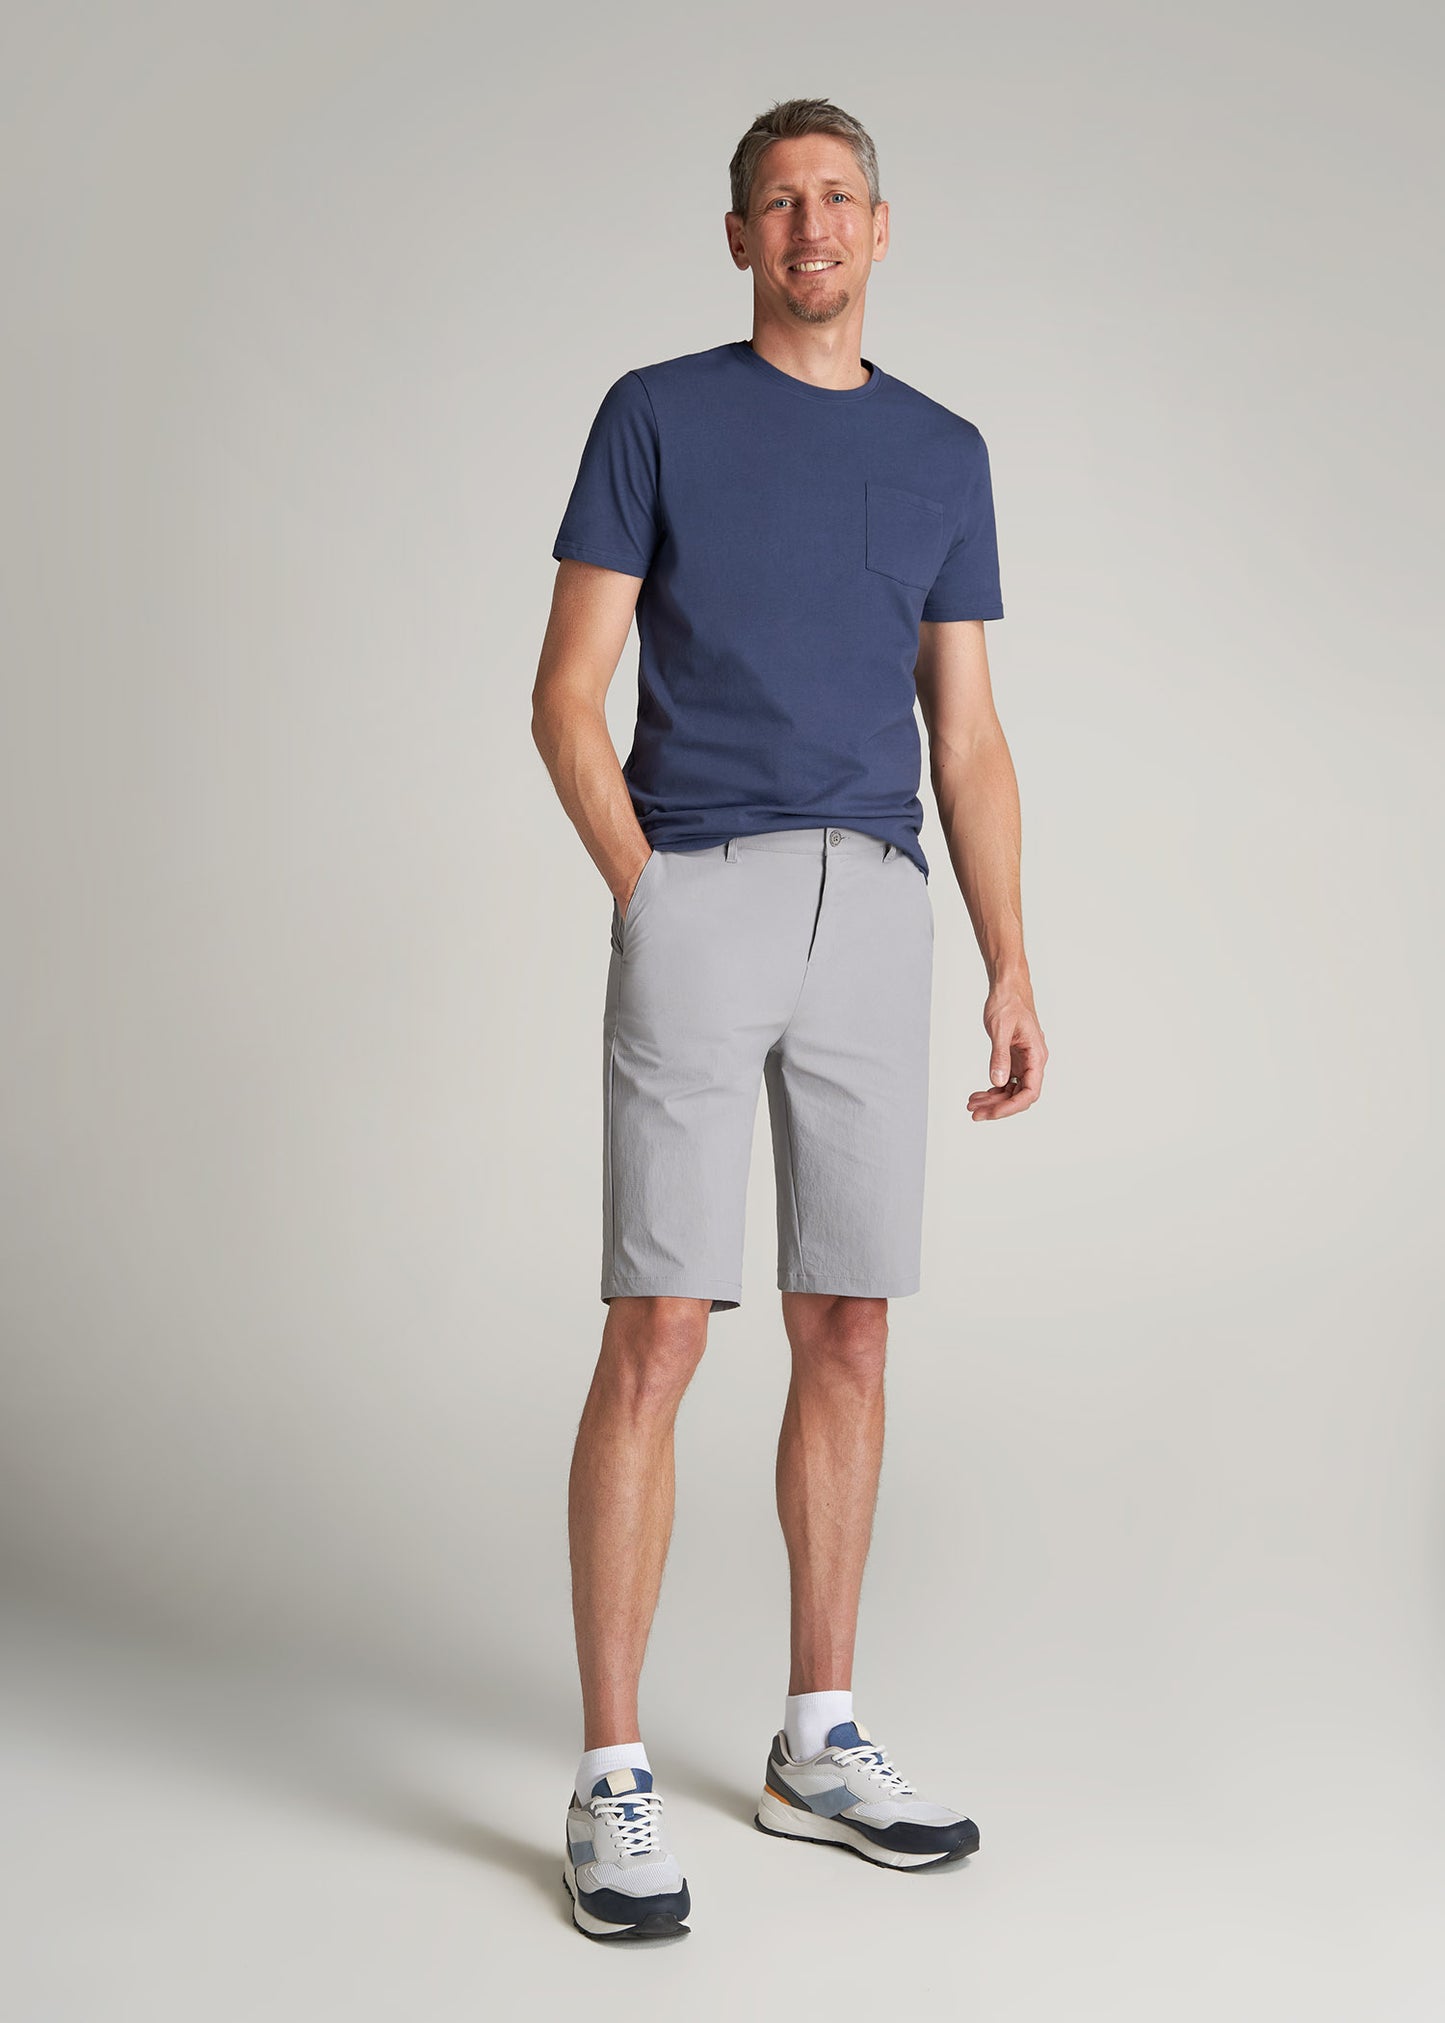 A tall man wearing American Tall's Premium Hybrid Shorts in Night Owl Grey and Everyday Pocket T-Shirt in Navy.